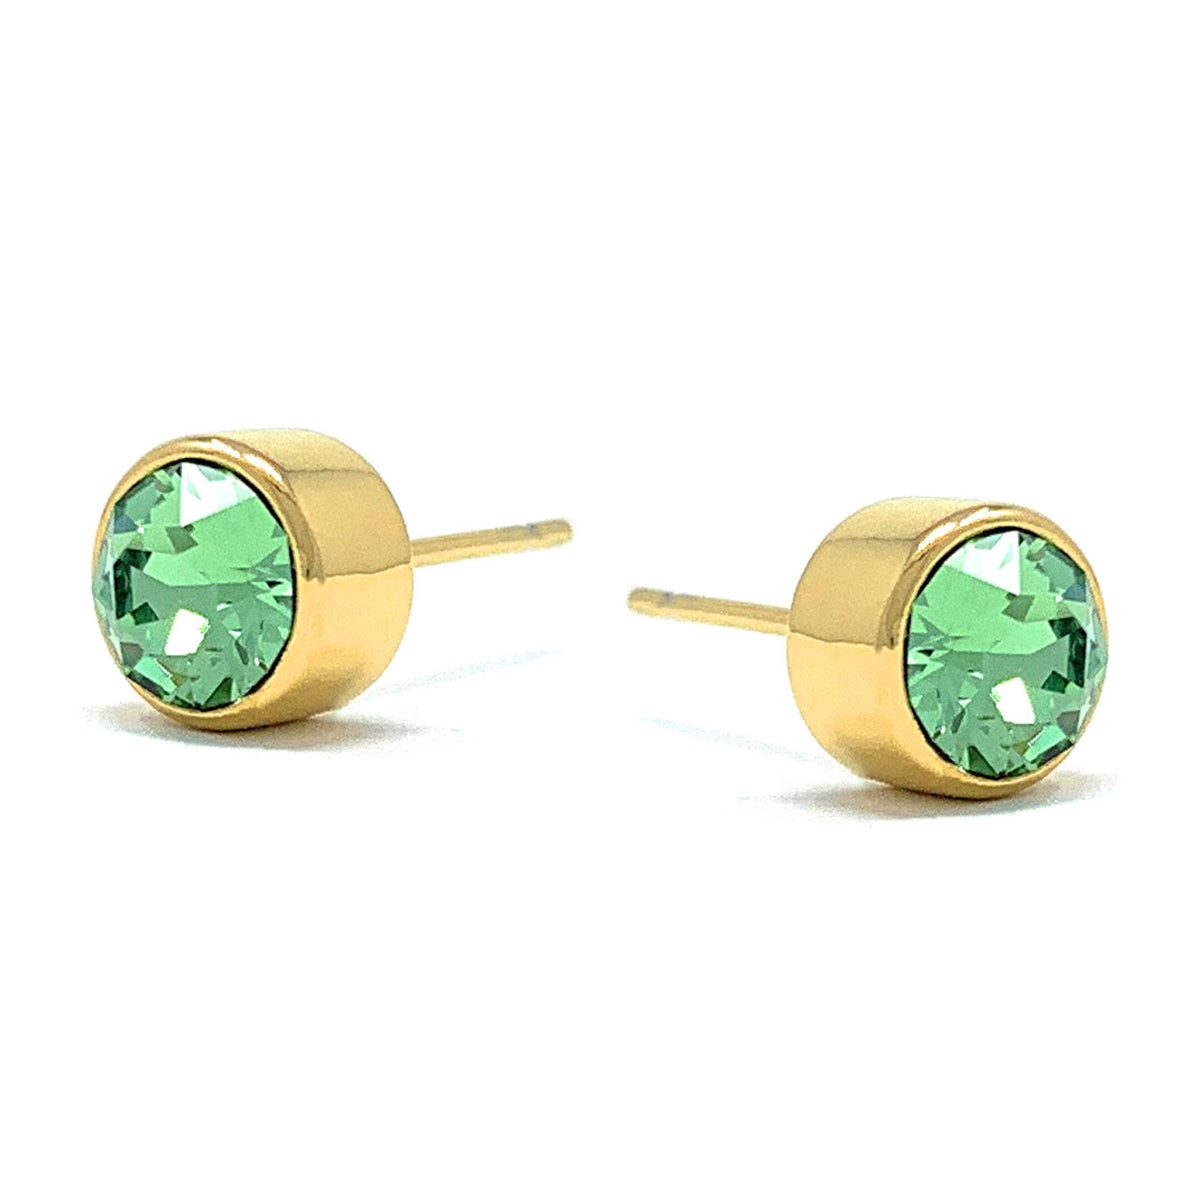 Harley Small Stud Earrings with Green Peridot Round Crystals from Swarovski Gold Plated - Ed Heart